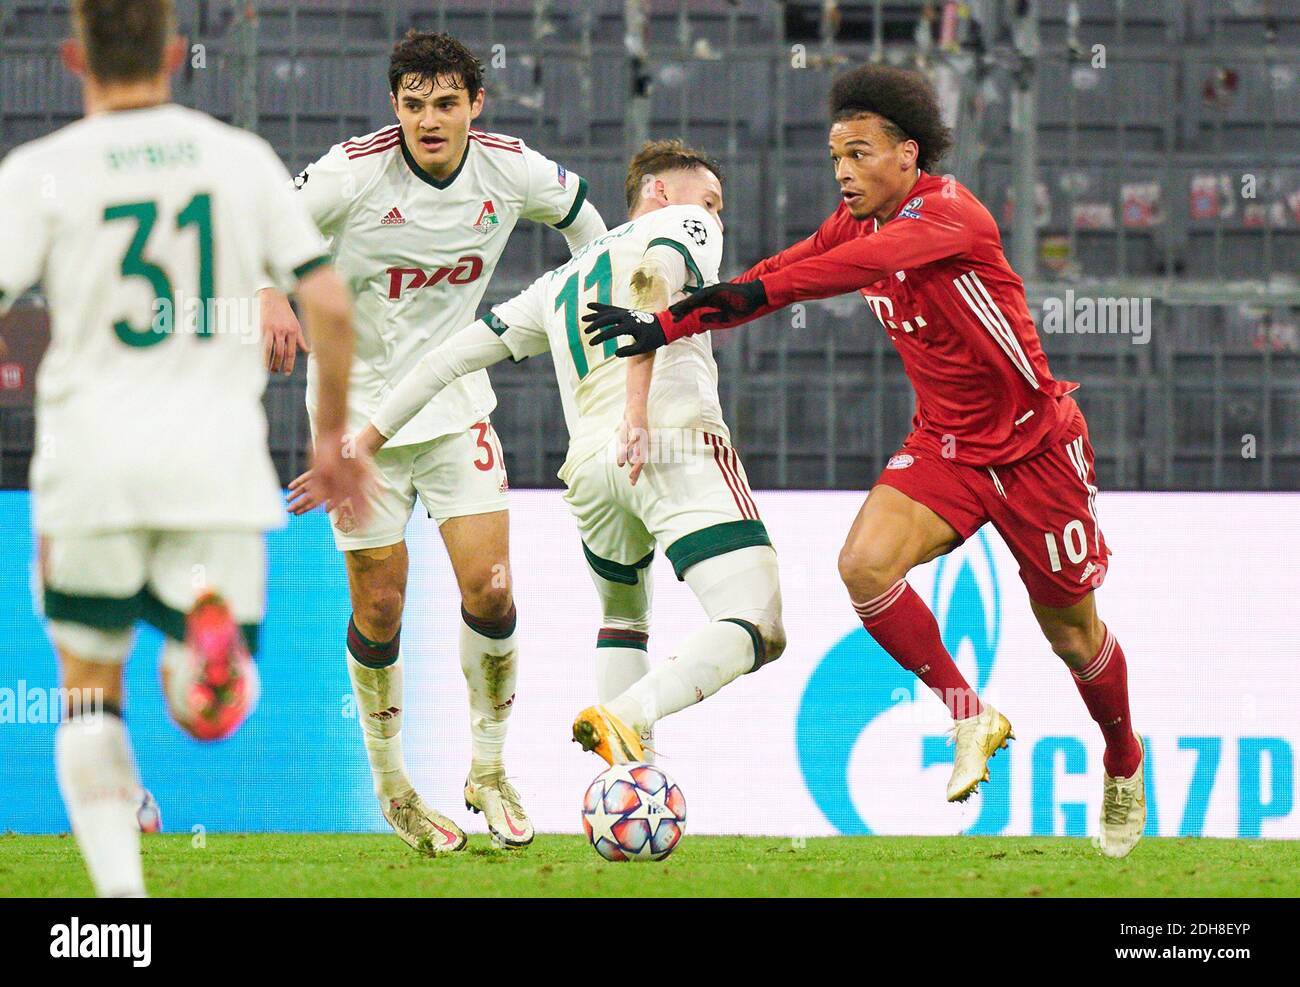 Leroy SANE, FCB 10  compete for the ball, tackling, duel, header, zweikampf, action, fight against Anton MIRANCHUK, Lok Moskau Nr. 11 Stanislav MAGKEEV, Lok Moskau Nr. 37  in the match  FC BAYERN MUENCHEN - LOKOMOTIVE MOSKAU 2-0 of football UEFA Champions League group stage in season 2020/2021 in Munich, December 9, 2020.   © Peter Schatz / Alamy Live News Stock Photo